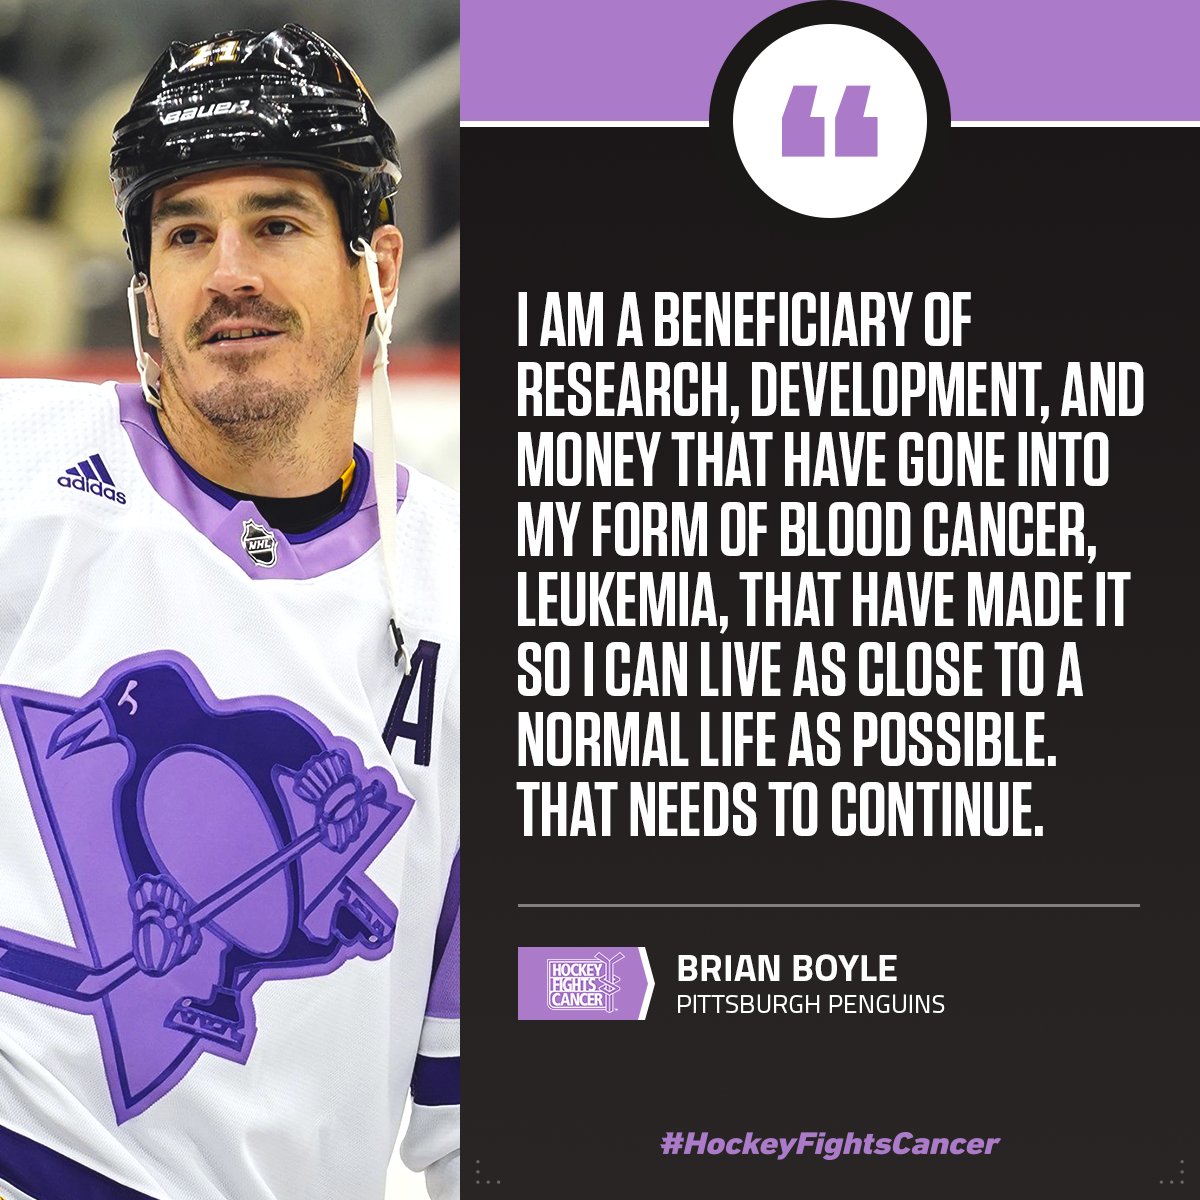 The Penguins took part in 'Hockey Fights Cancer' night last night